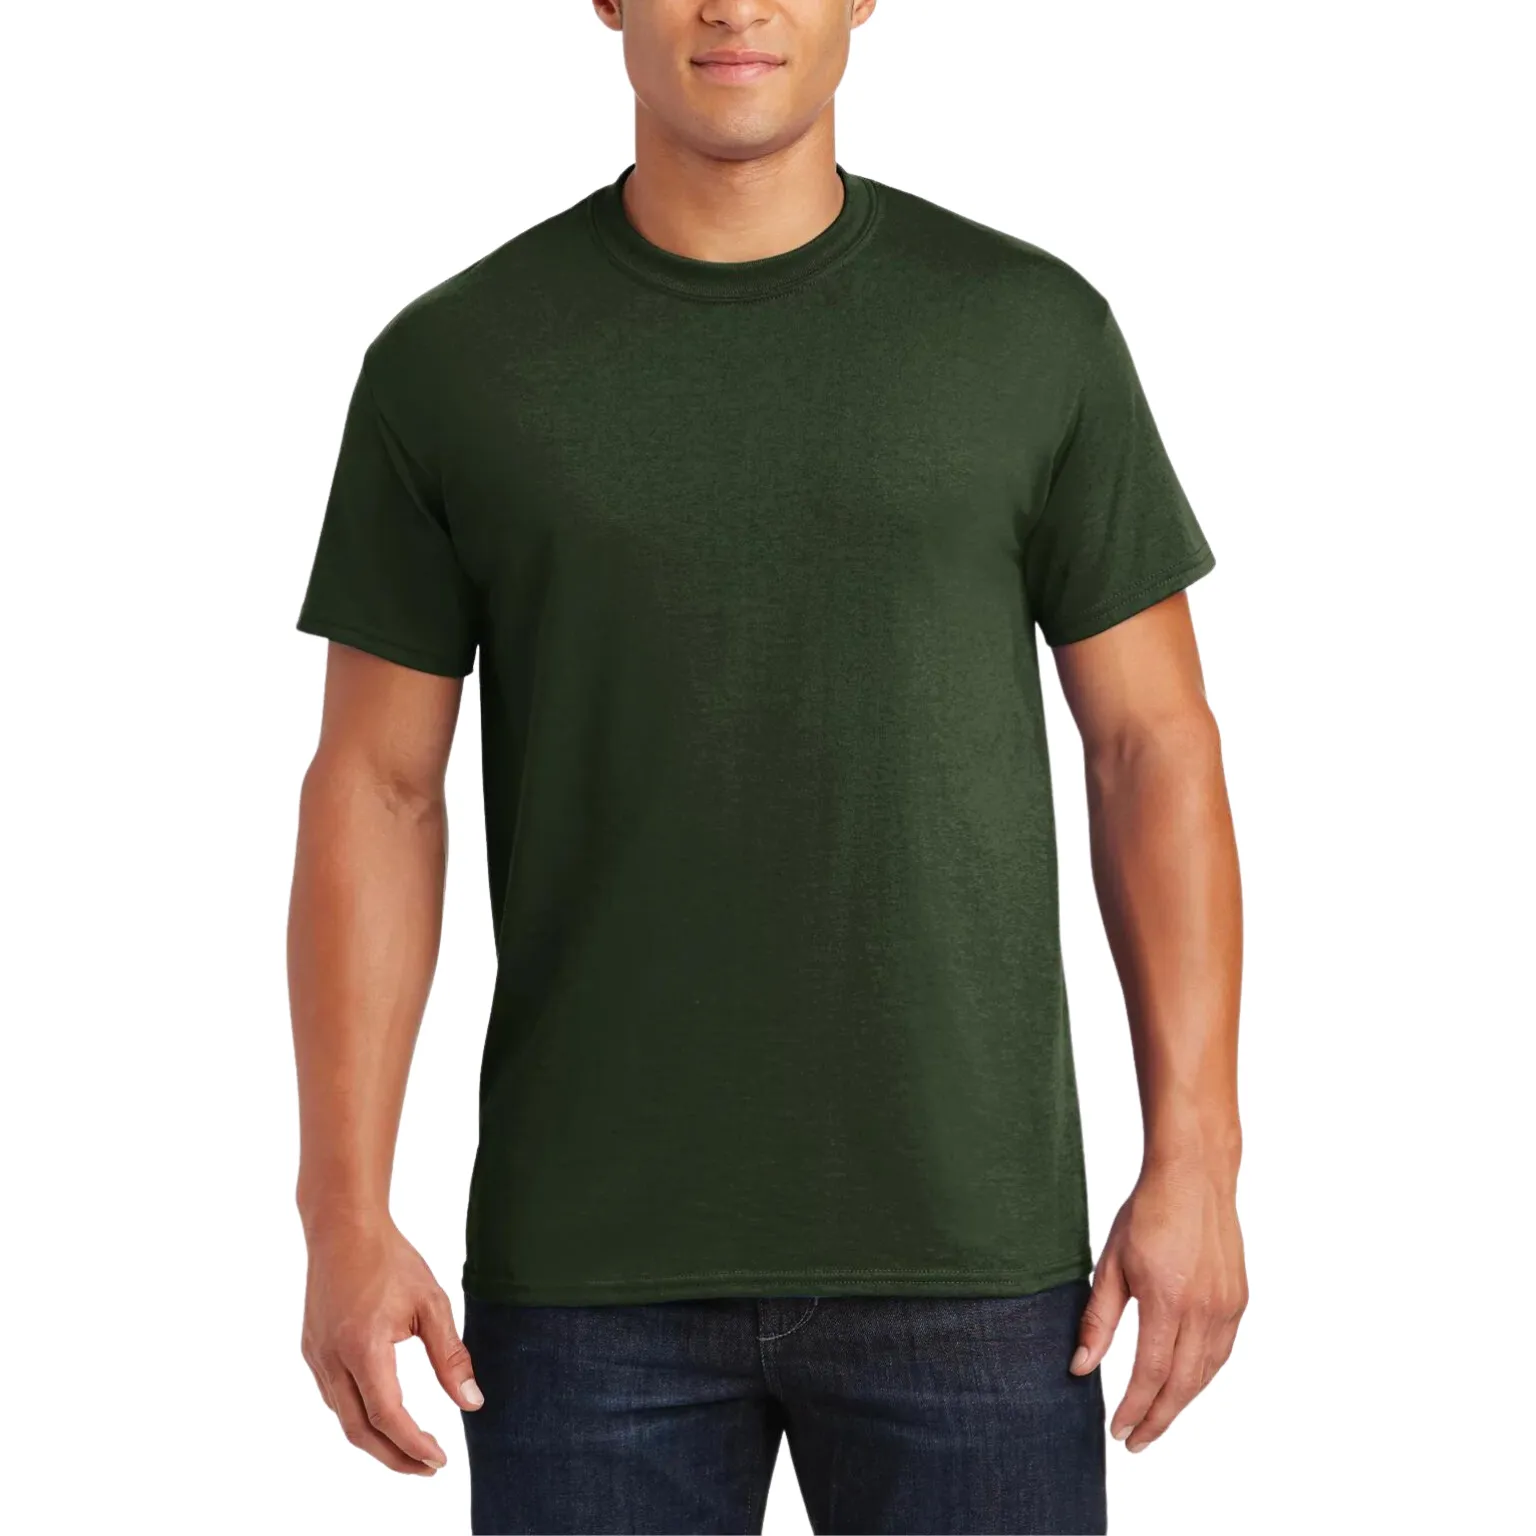 Lightweight T-shirt manufacturing with trendy design